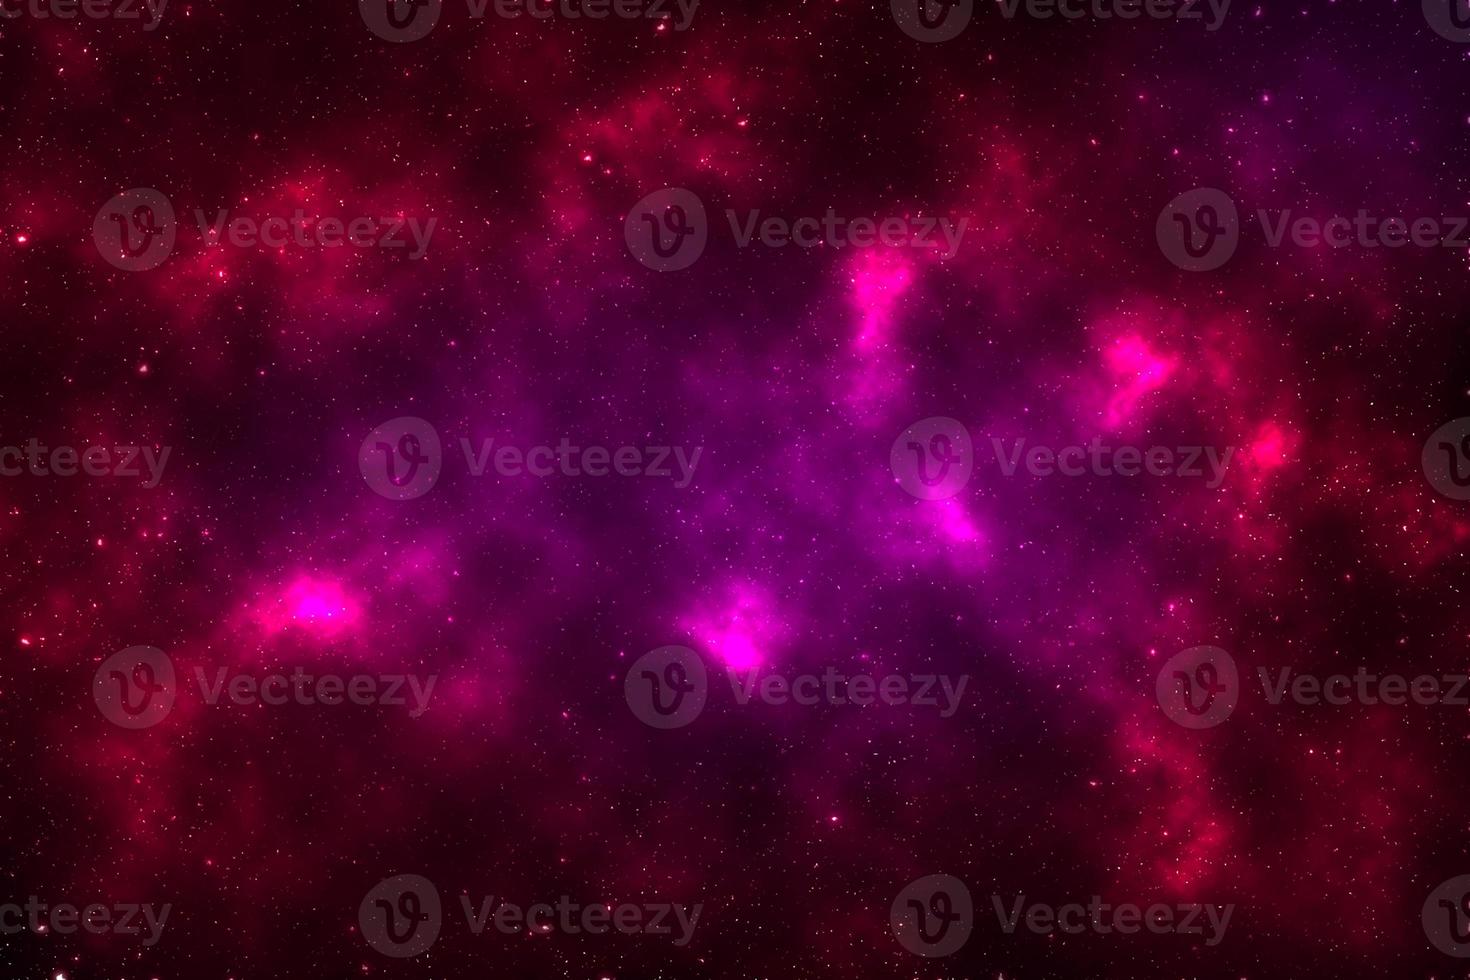 Abstract space background photo